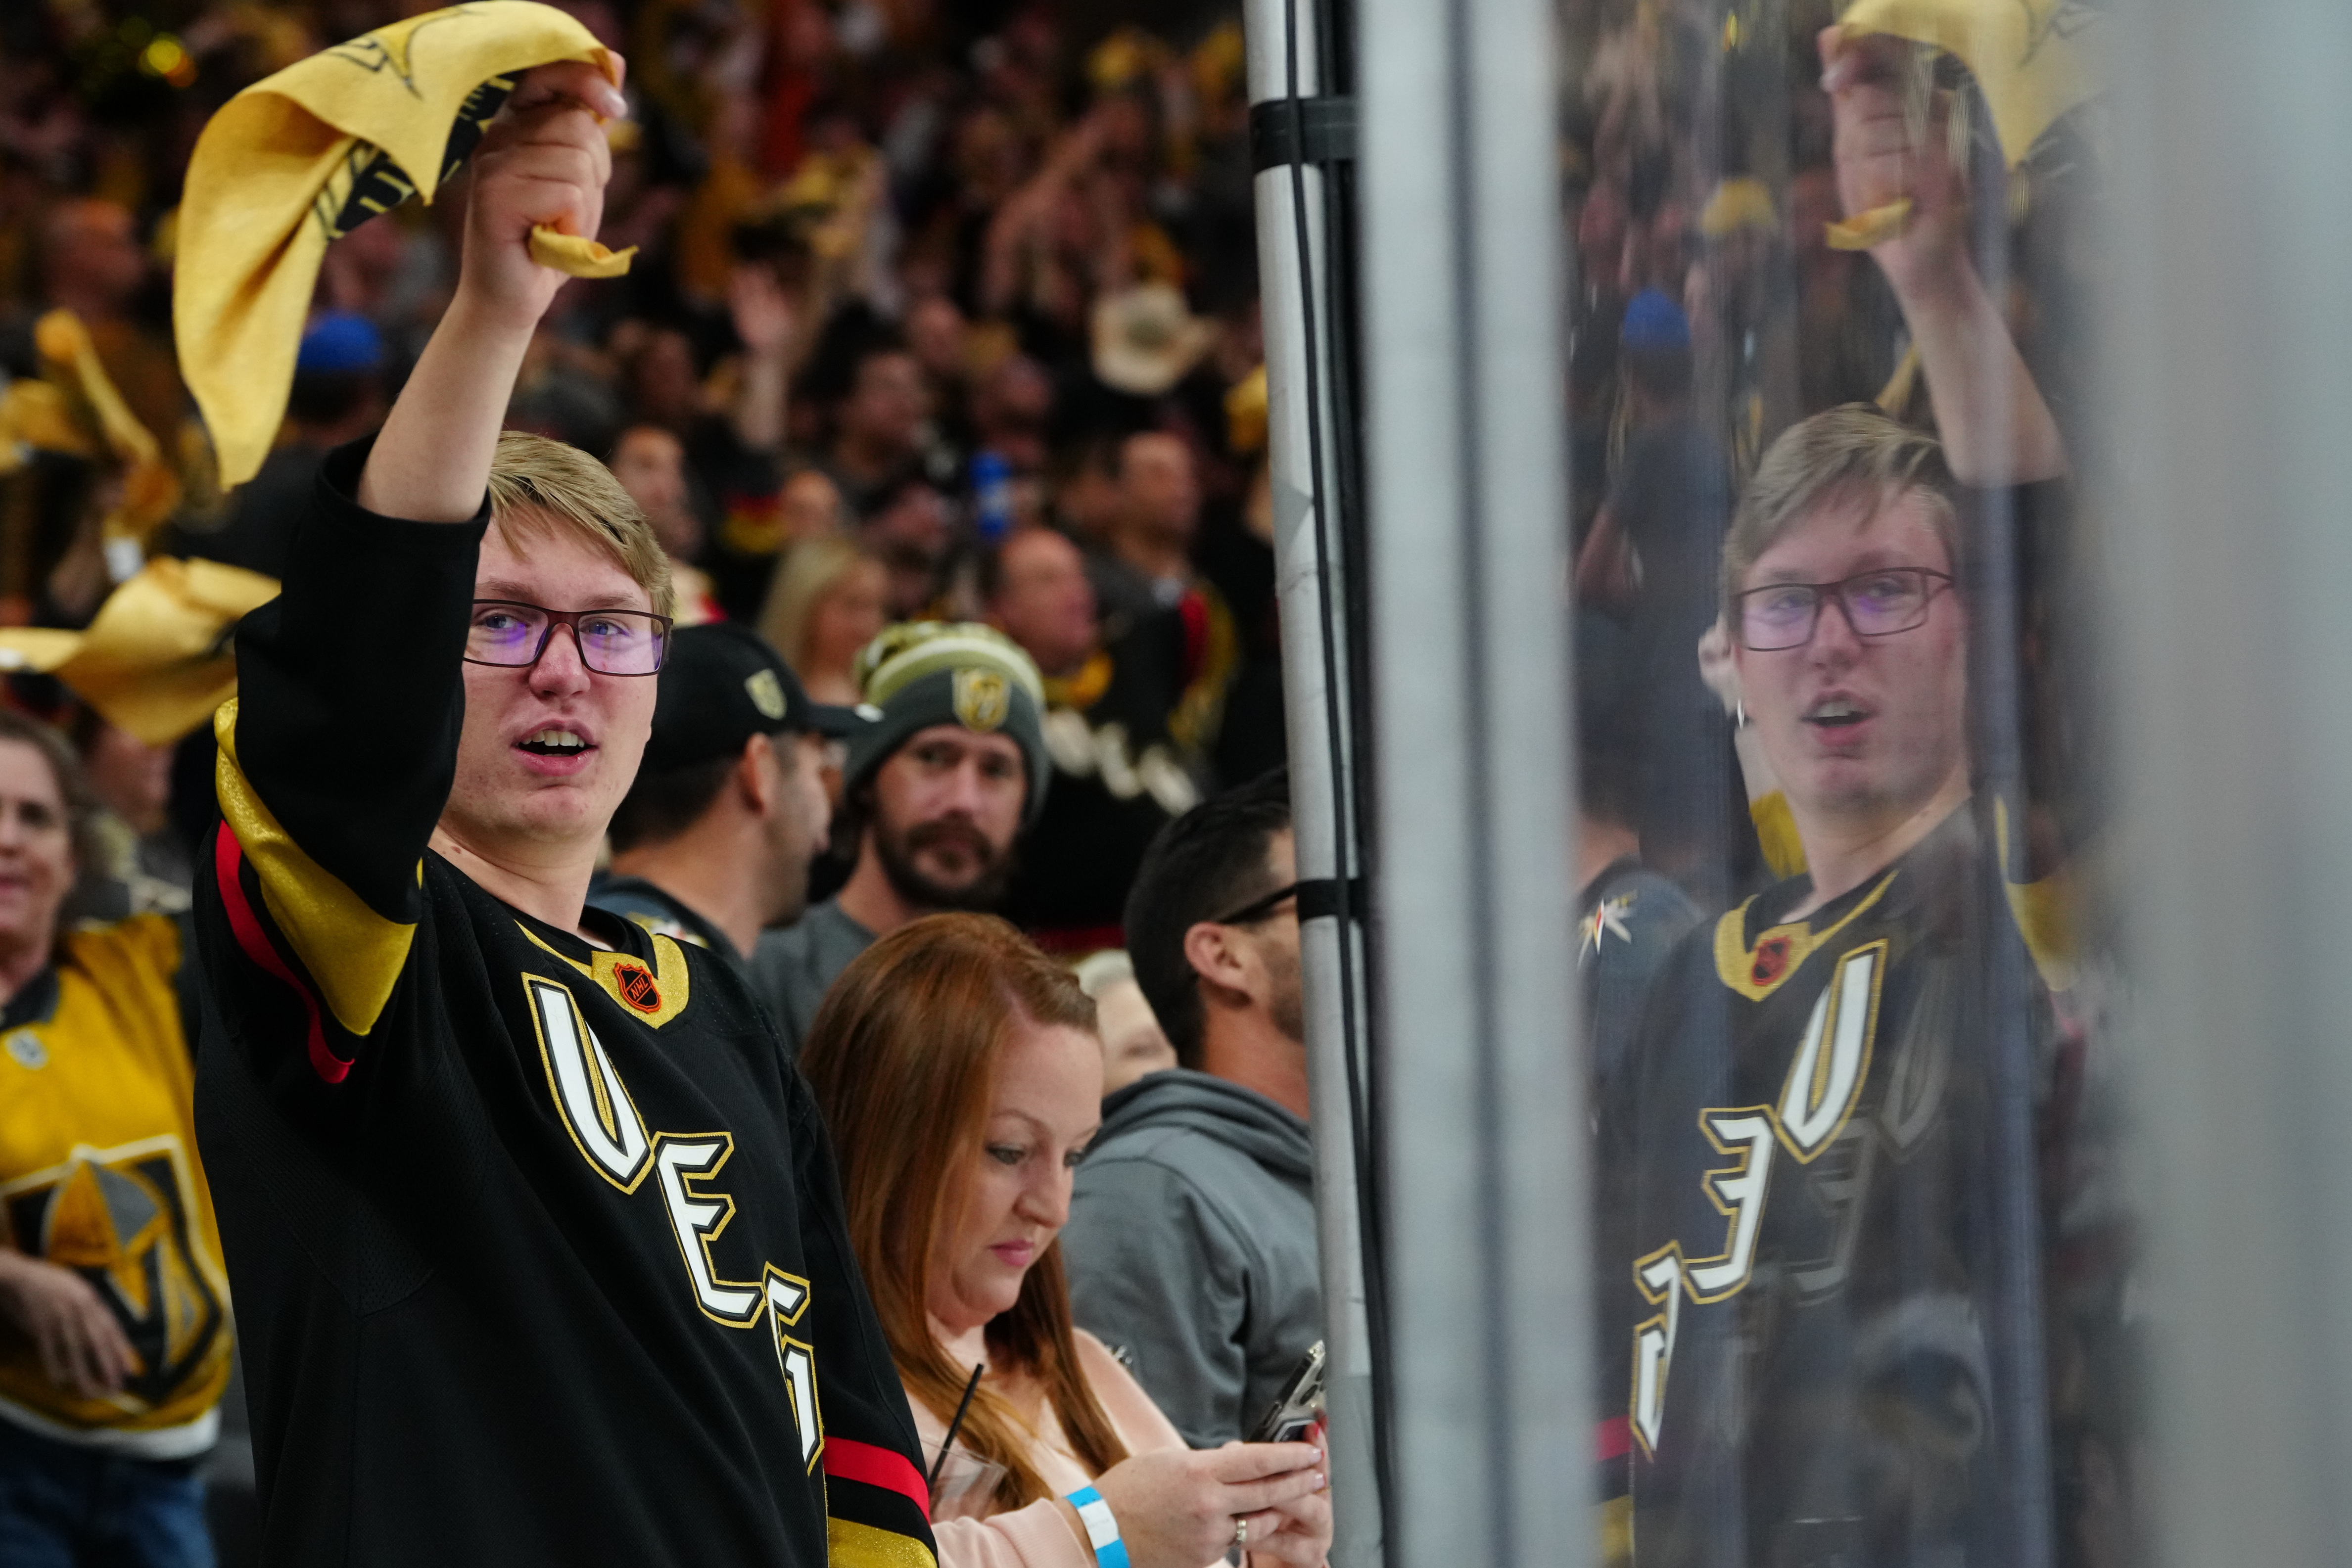 Most of US cheering for Golden Knights to win Stanley Cup Final, report says